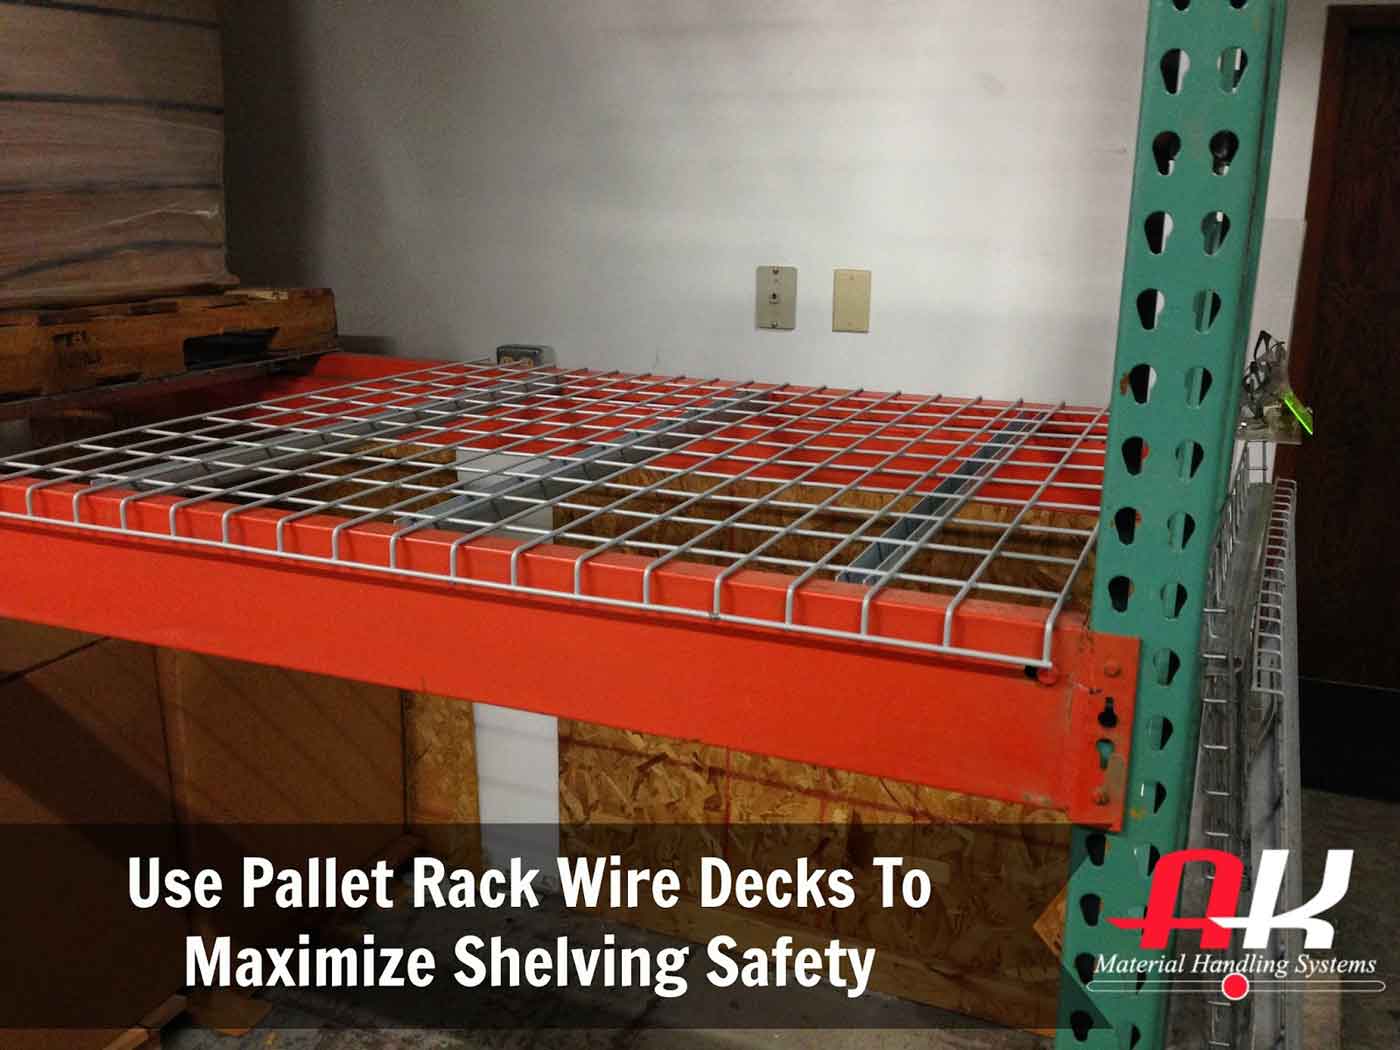 Use pallet rack wire decks to maximize shelving safety